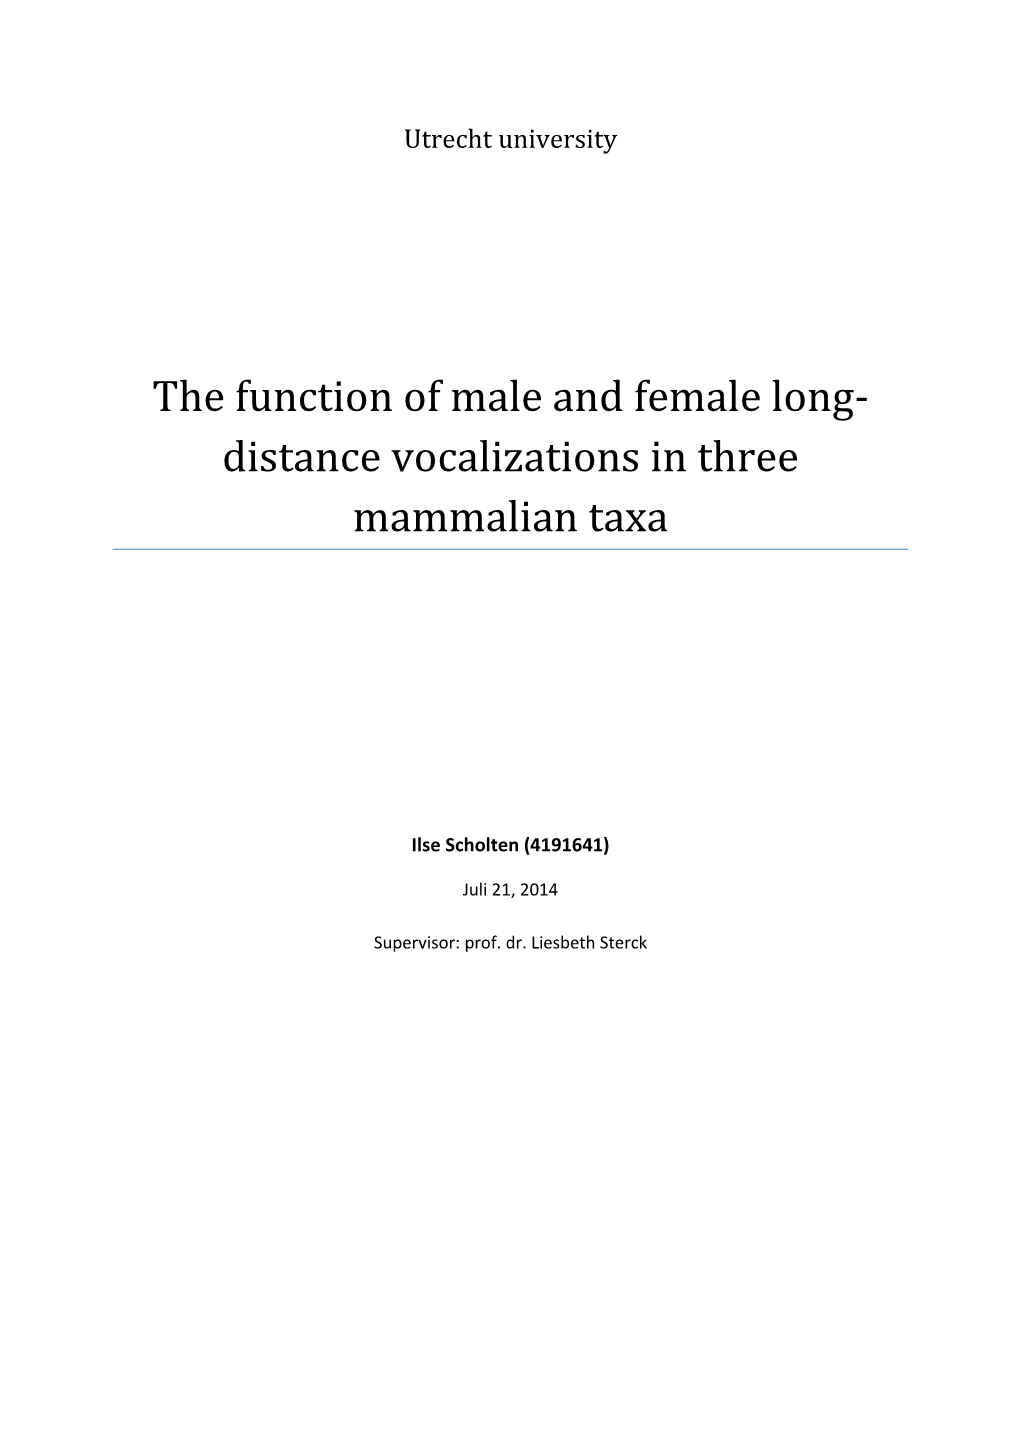 The Function of Male and Female Long-Distance Vocalizations in Three